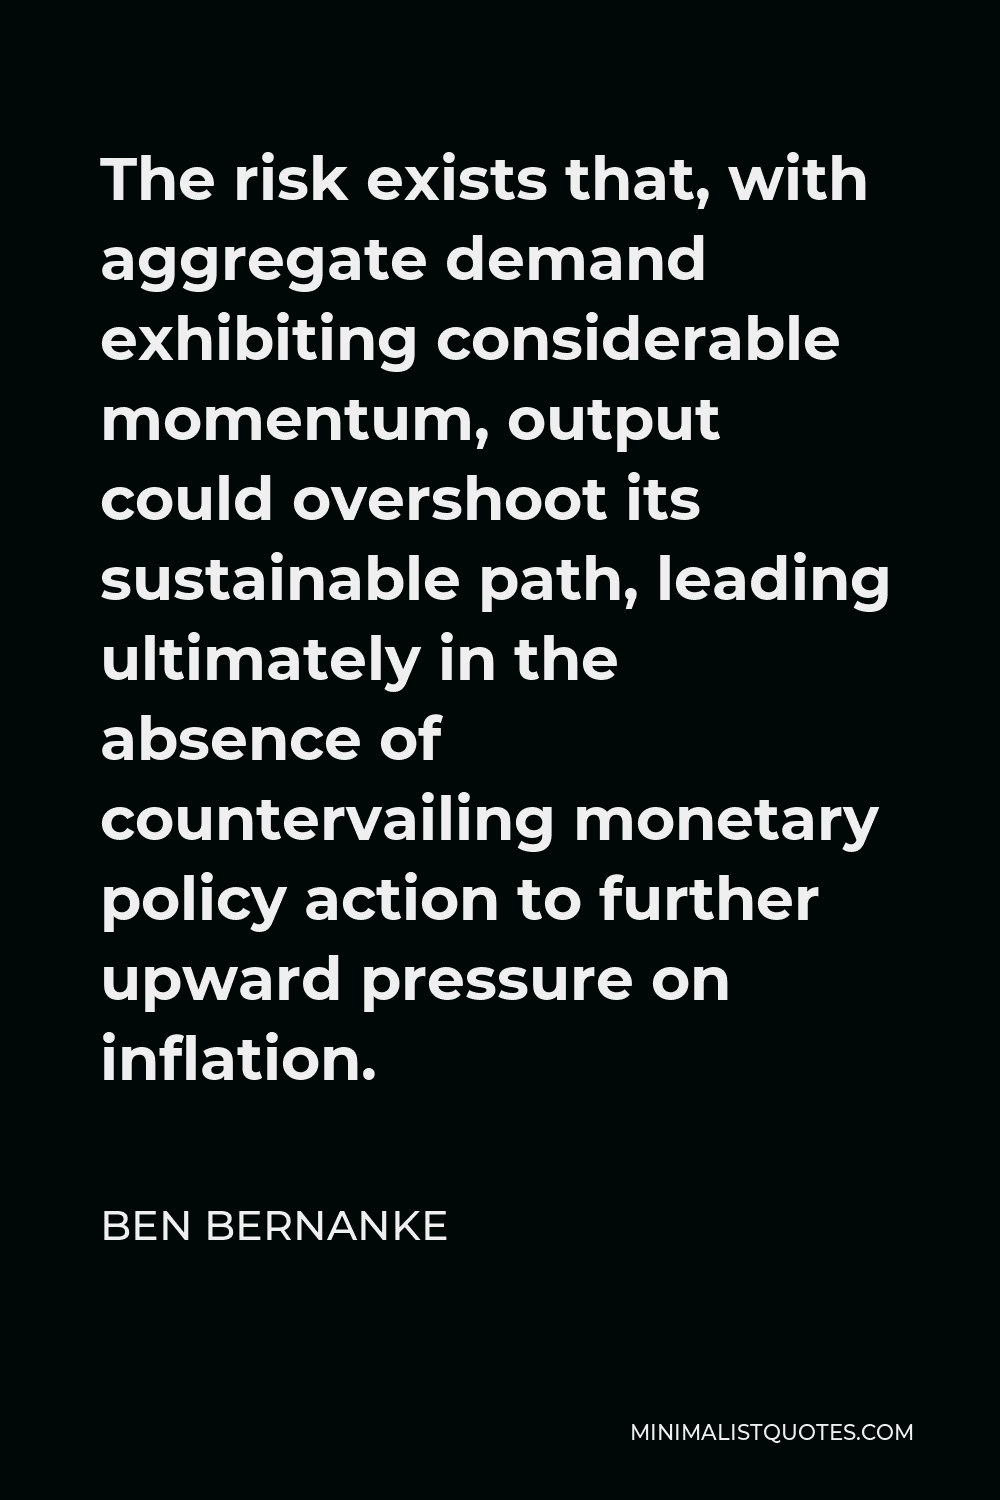 Ben Bernanke Quote - The risk exists that, with aggregate demand exhibiting considerable momentum, output could overshoot its sustainable path, leading ultimately in the absence of countervailing monetary policy action to further upward pressure on inflation.